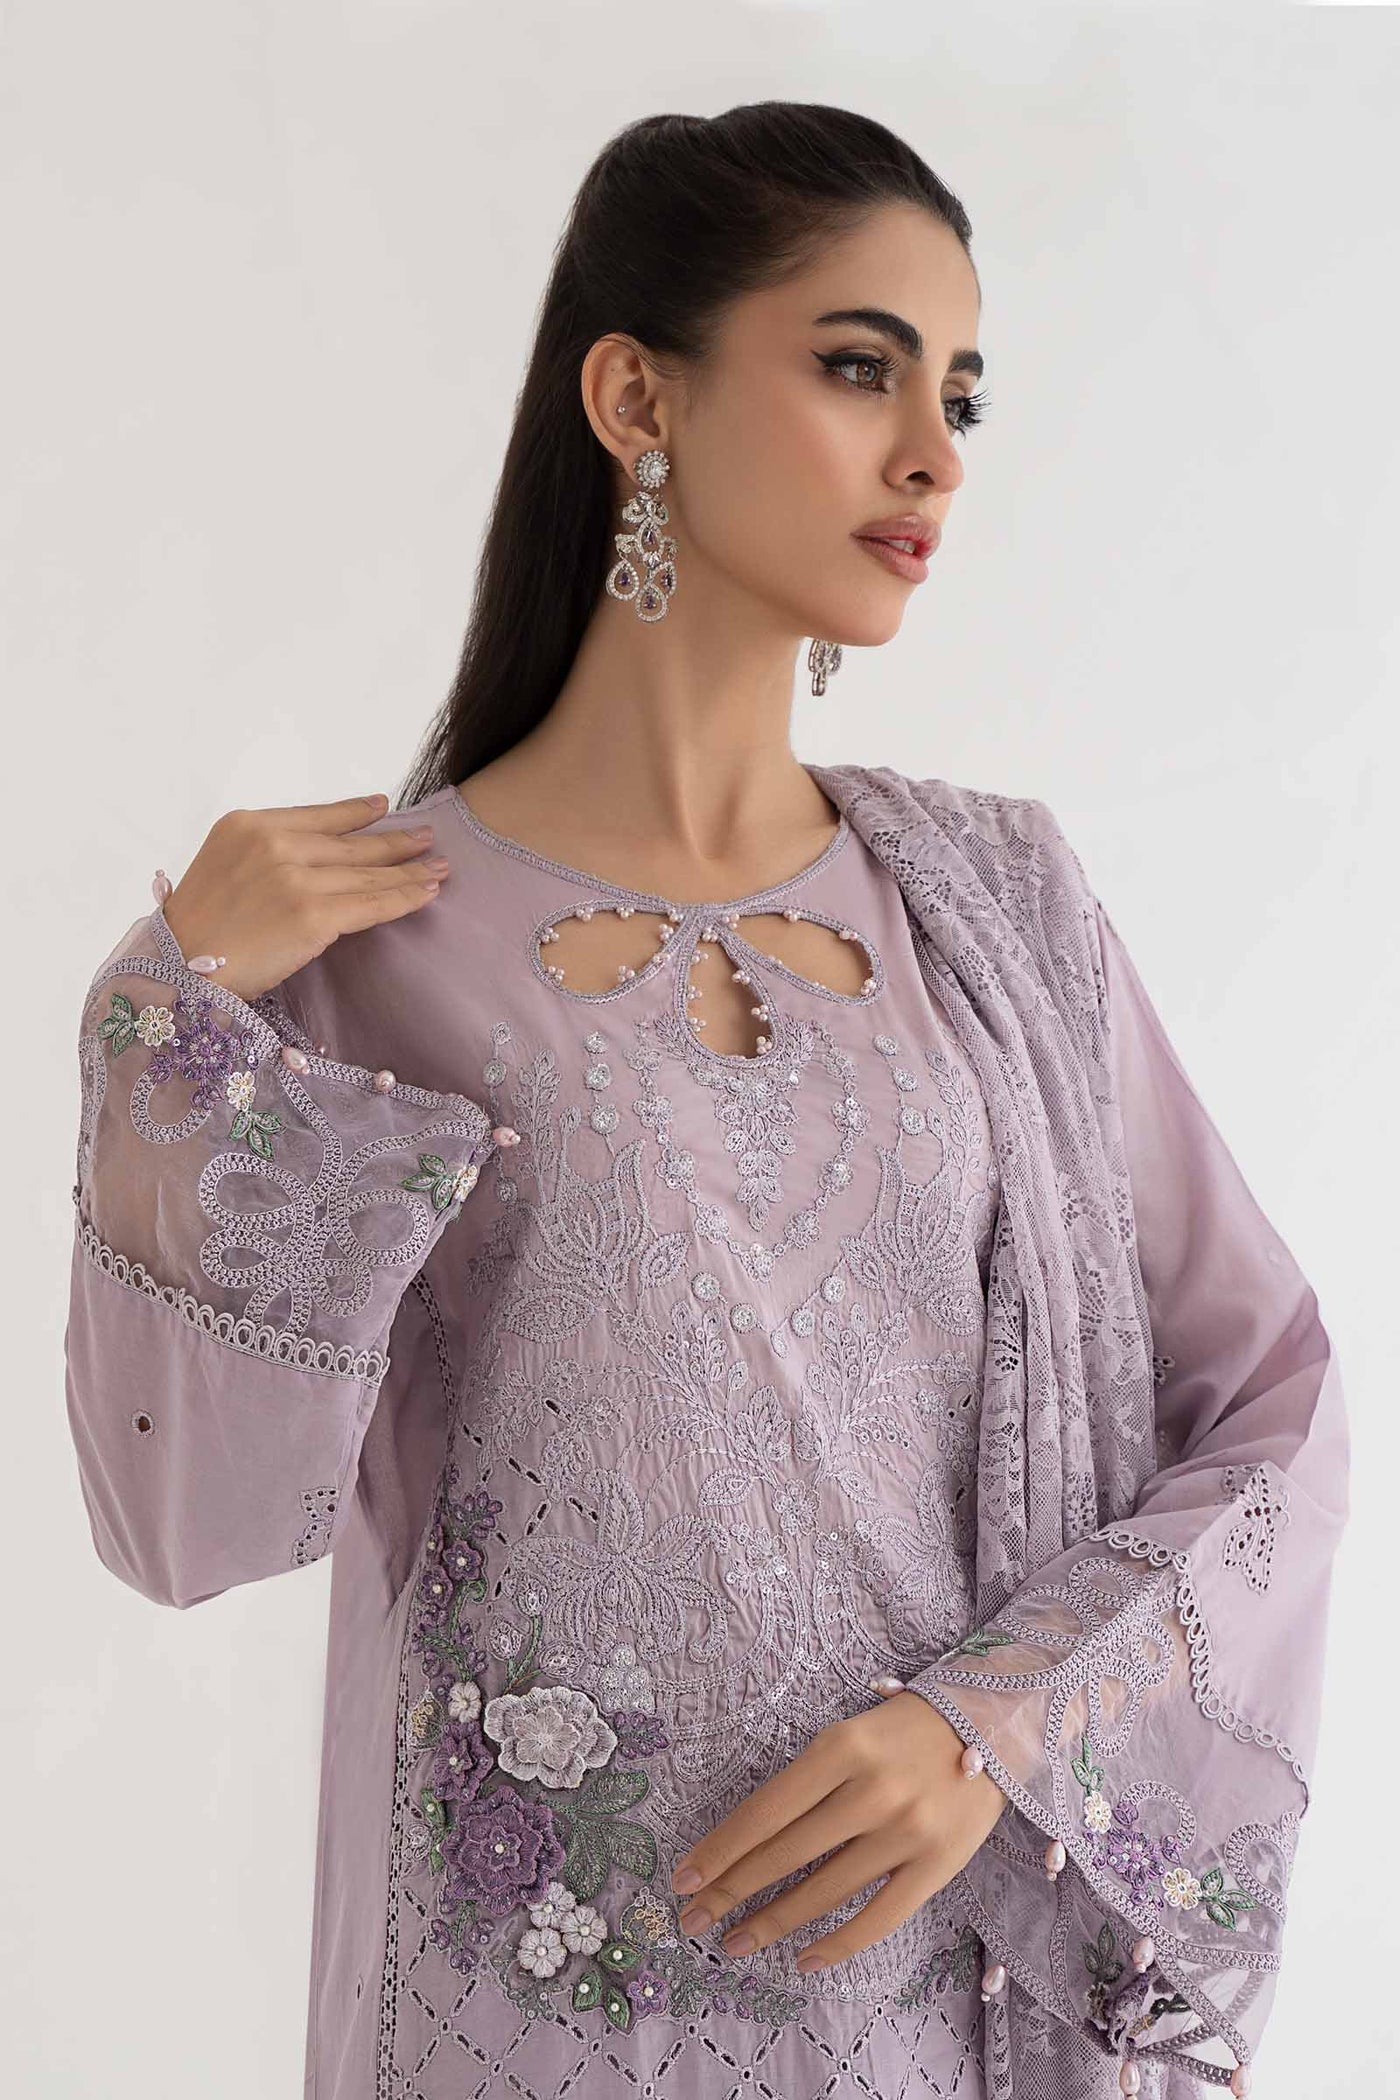 3 PIECE EMBROIDERED LAWN SUIT | DS-2411-B